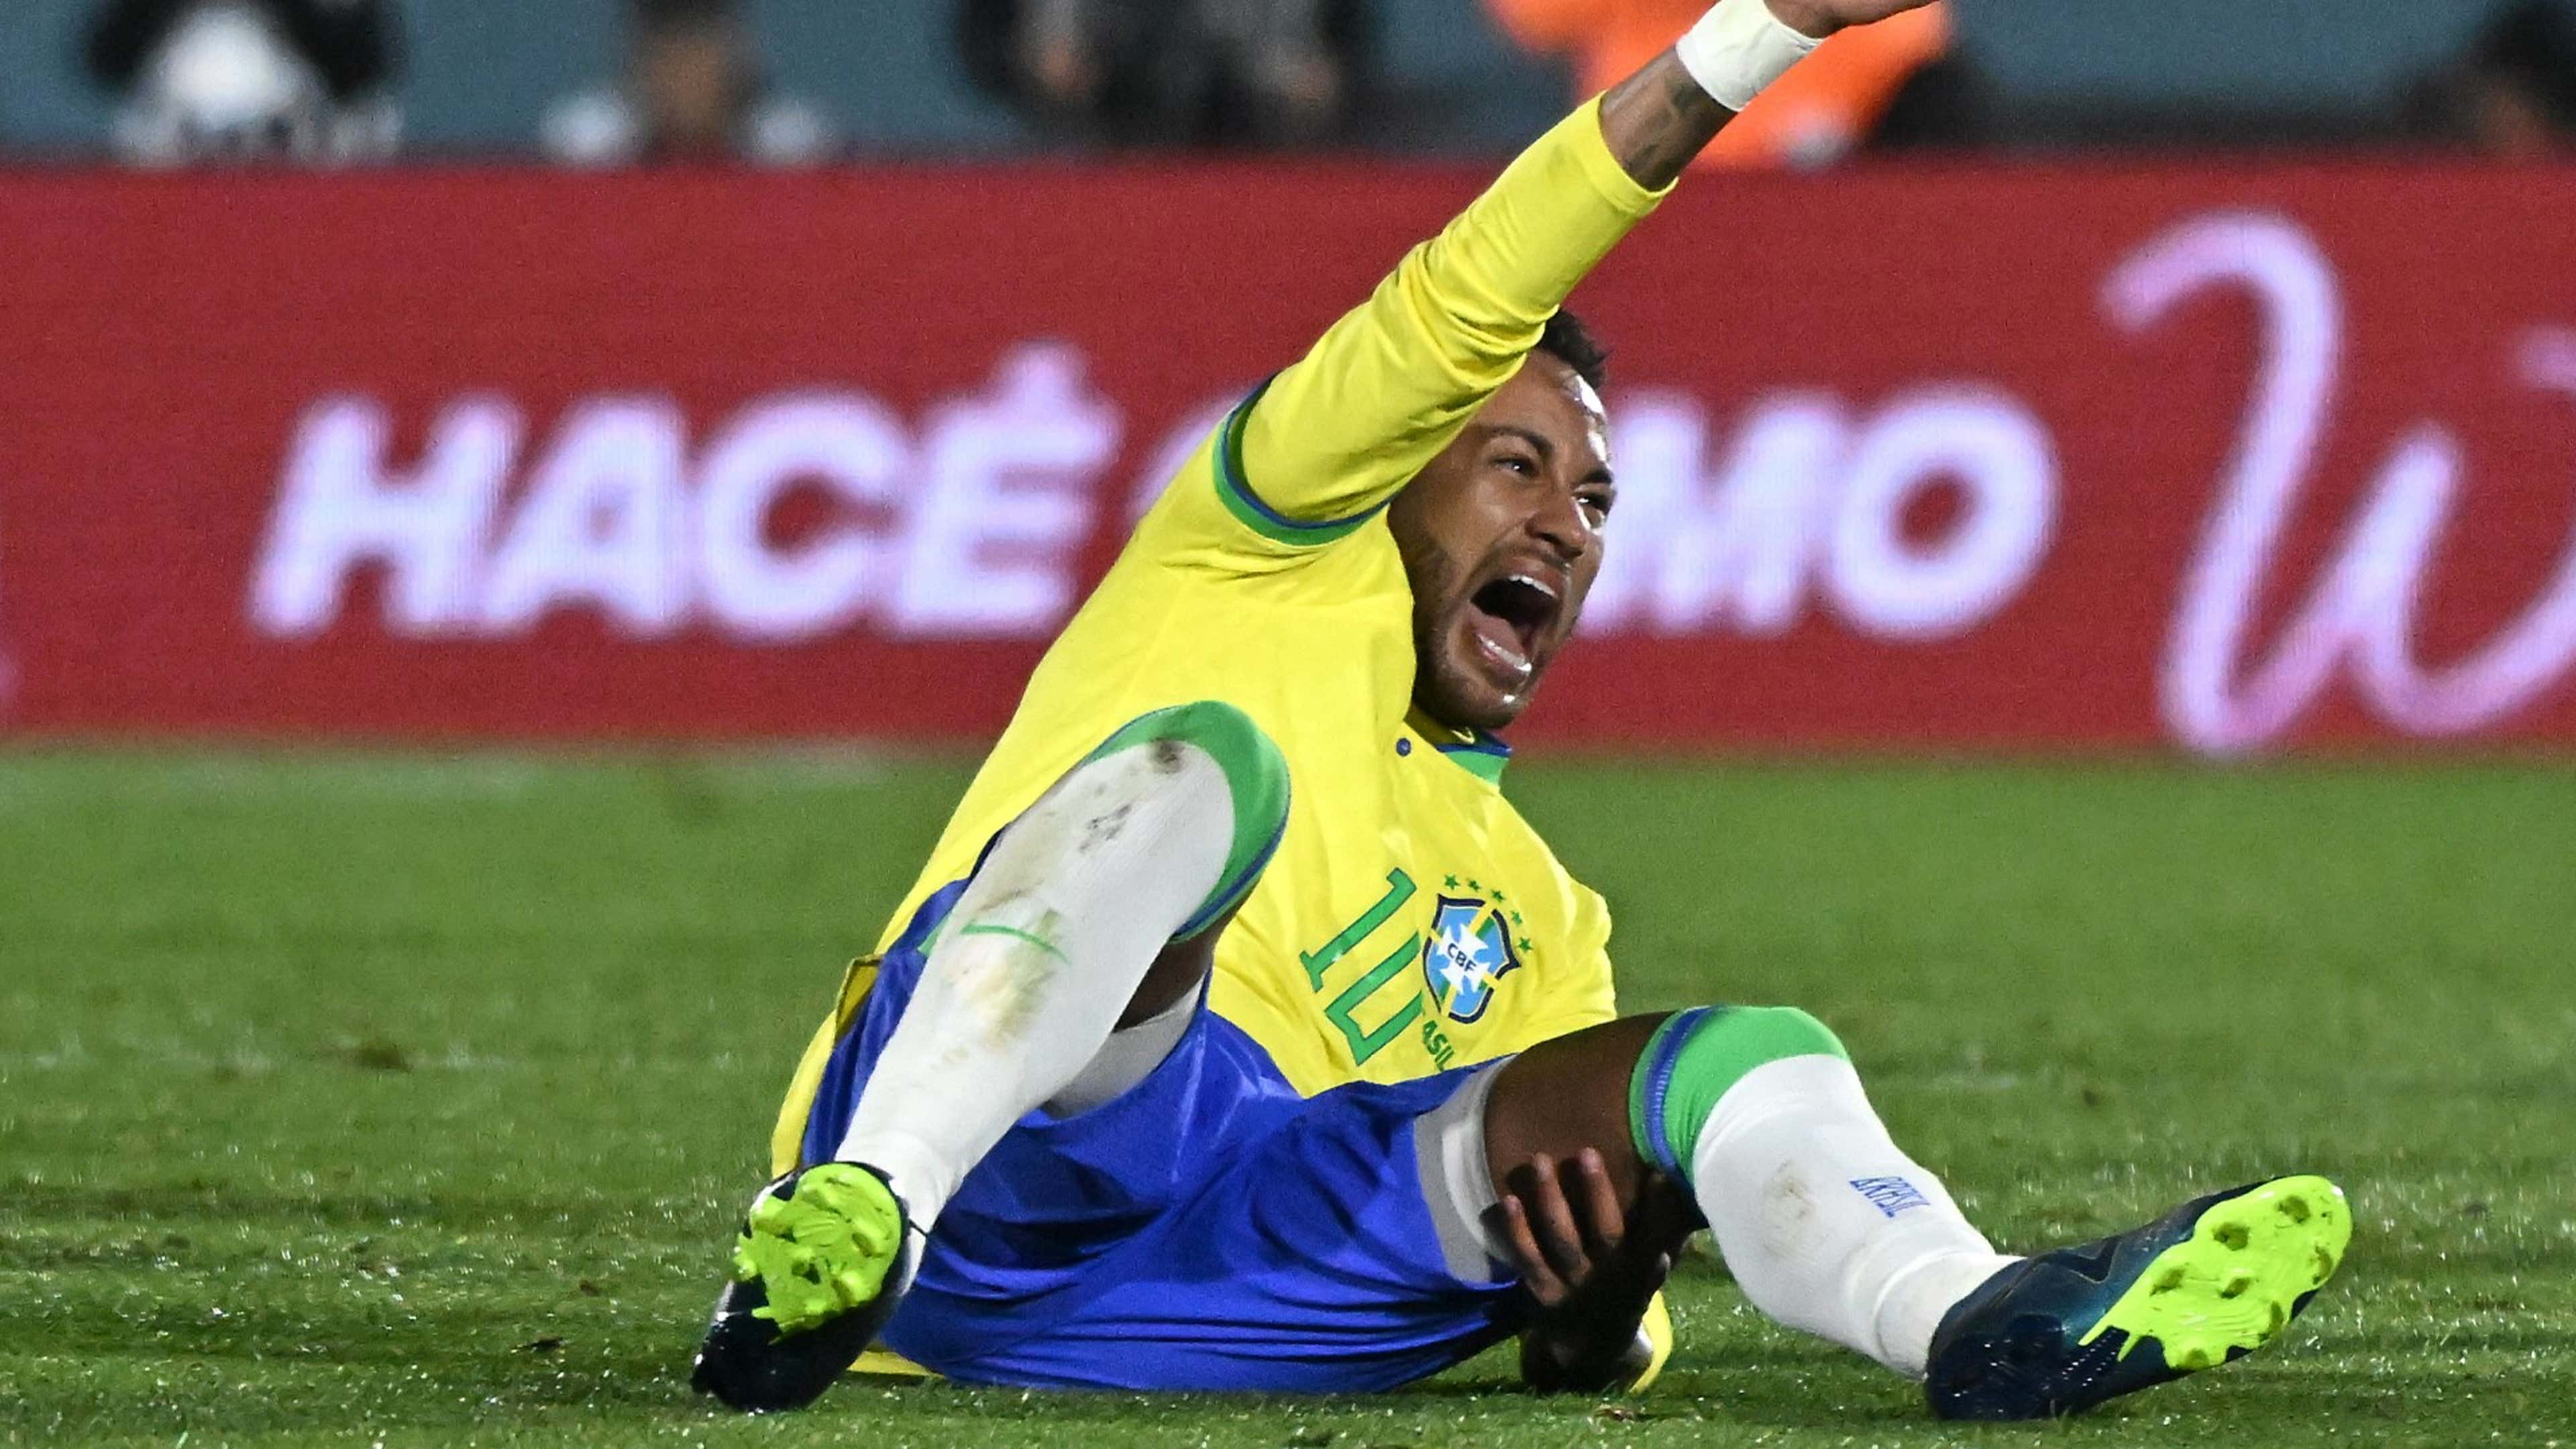 I have faith' - Neymar reacts after suffering potentially serious knee  injury on international duty with Brazil | Goal.com